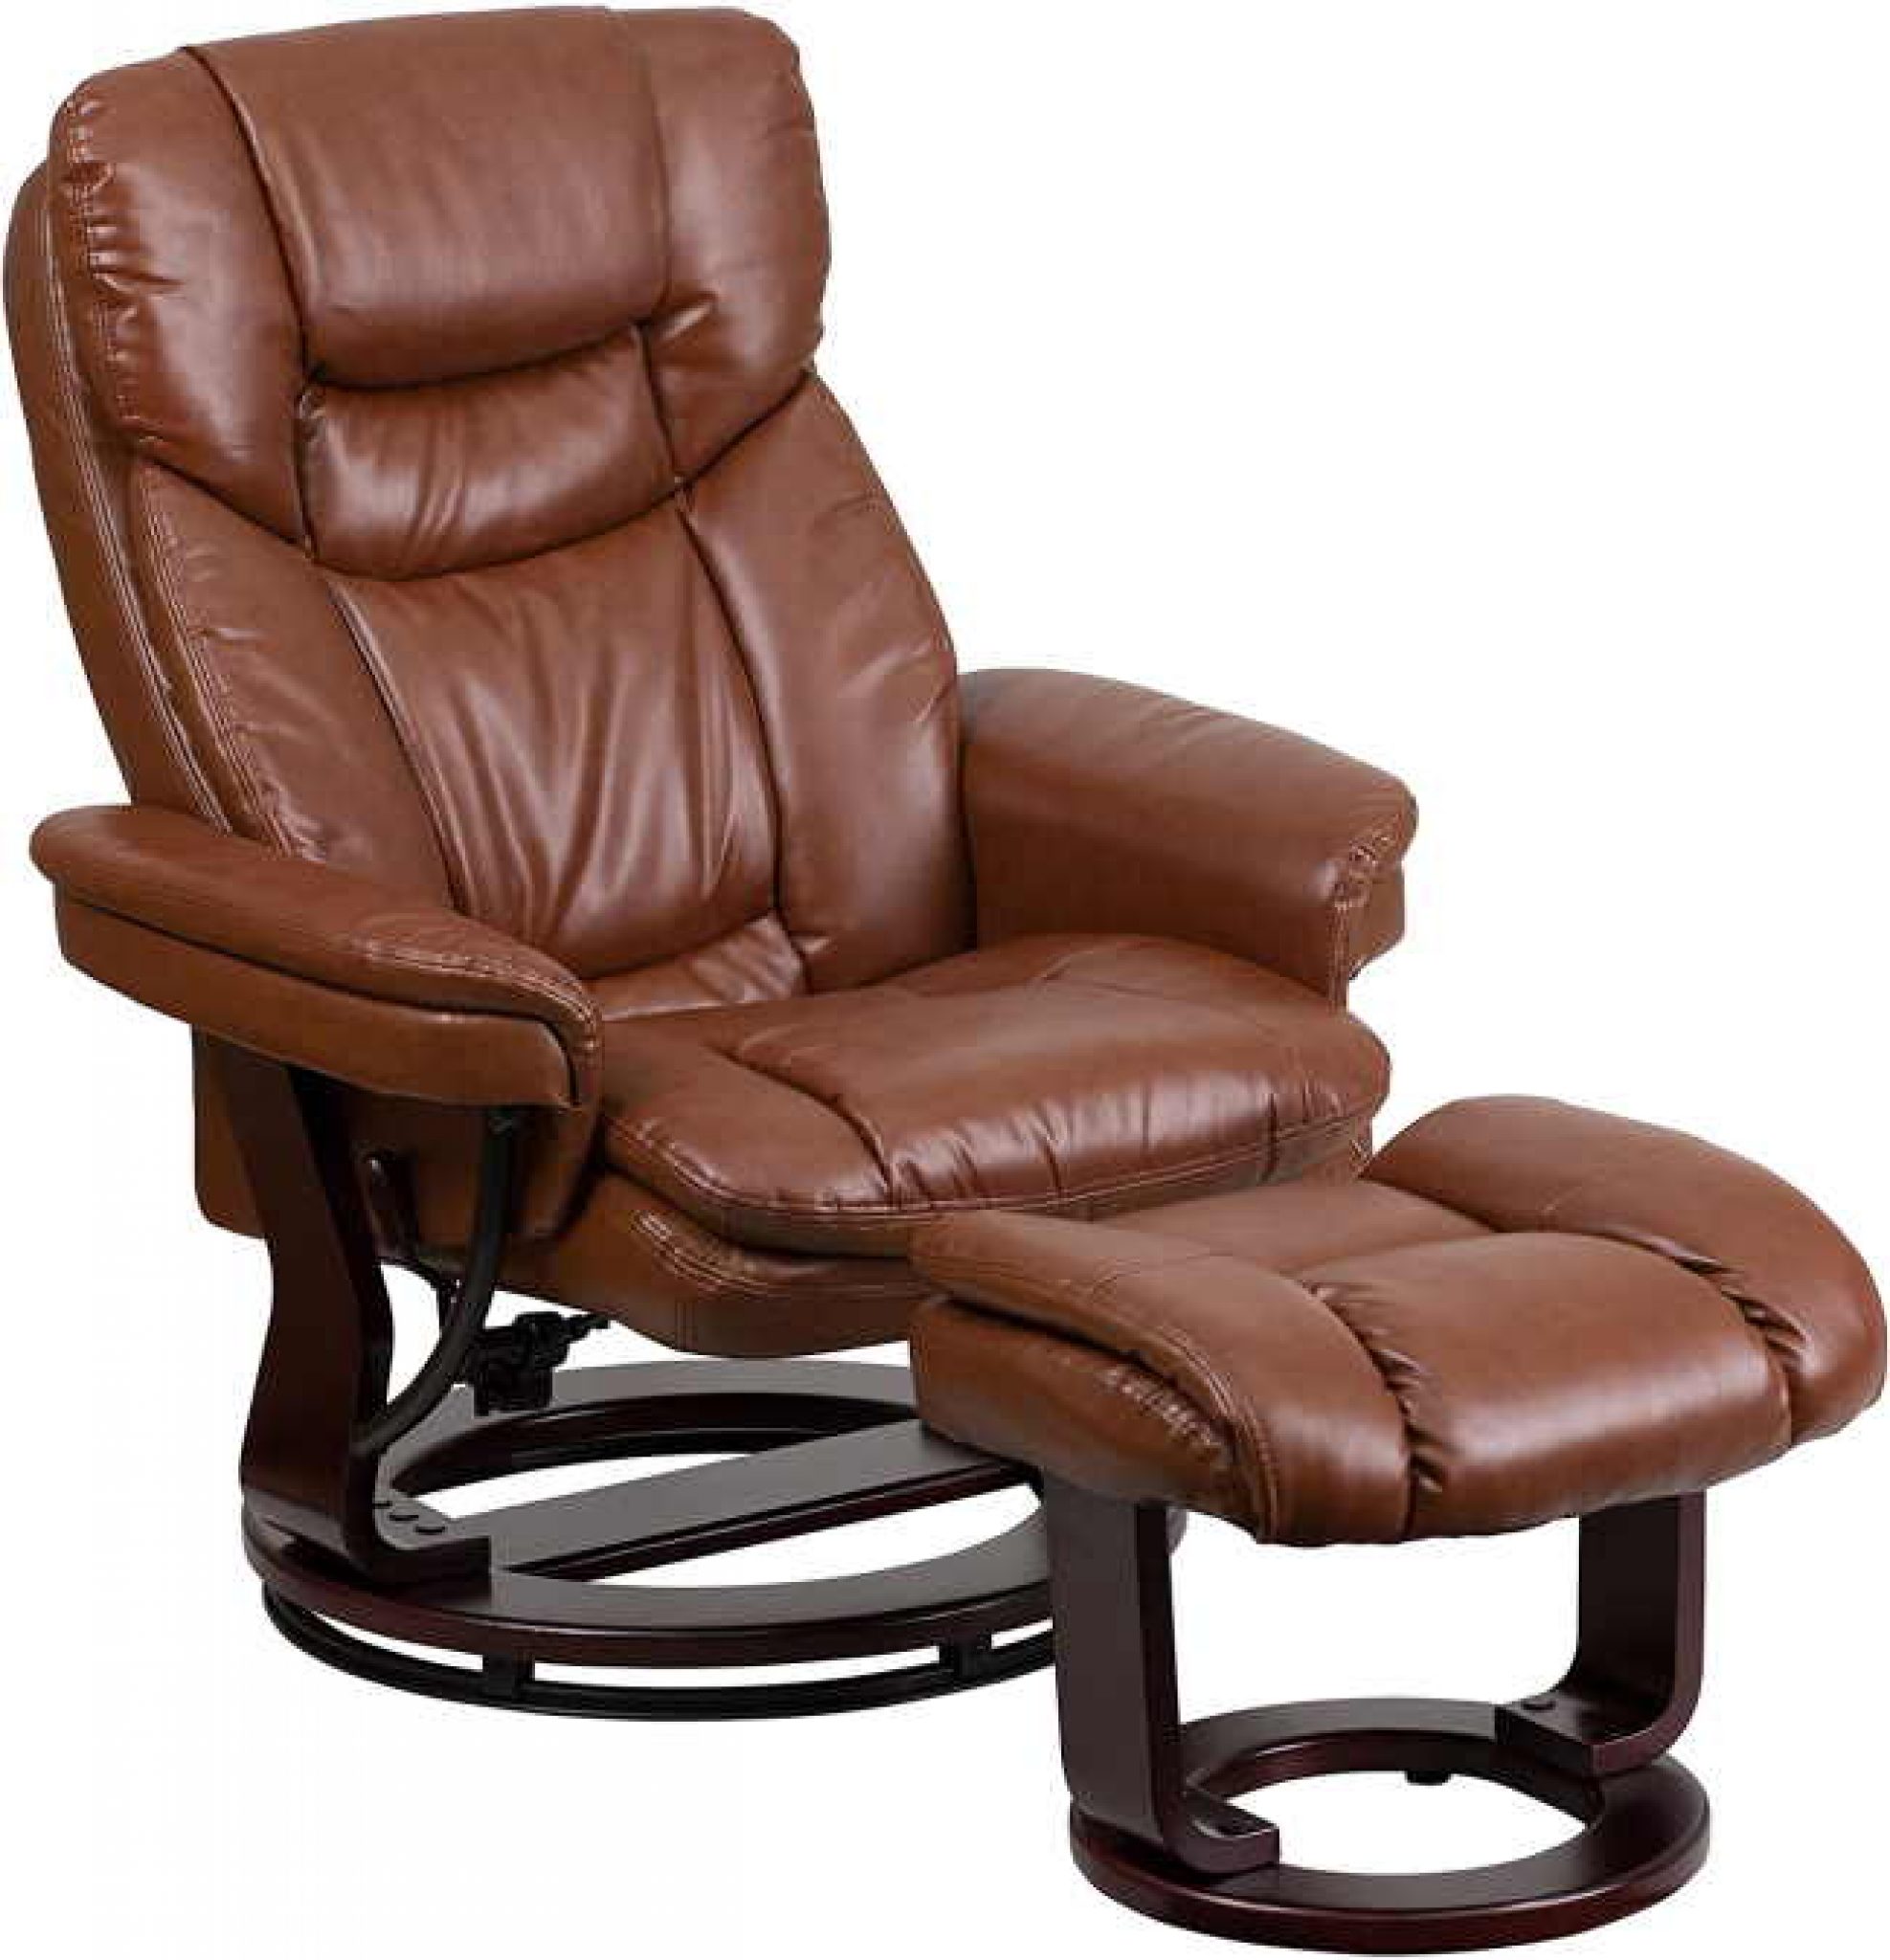 10 Best Real Leather Swivel Recliner Chairs Buying Guide